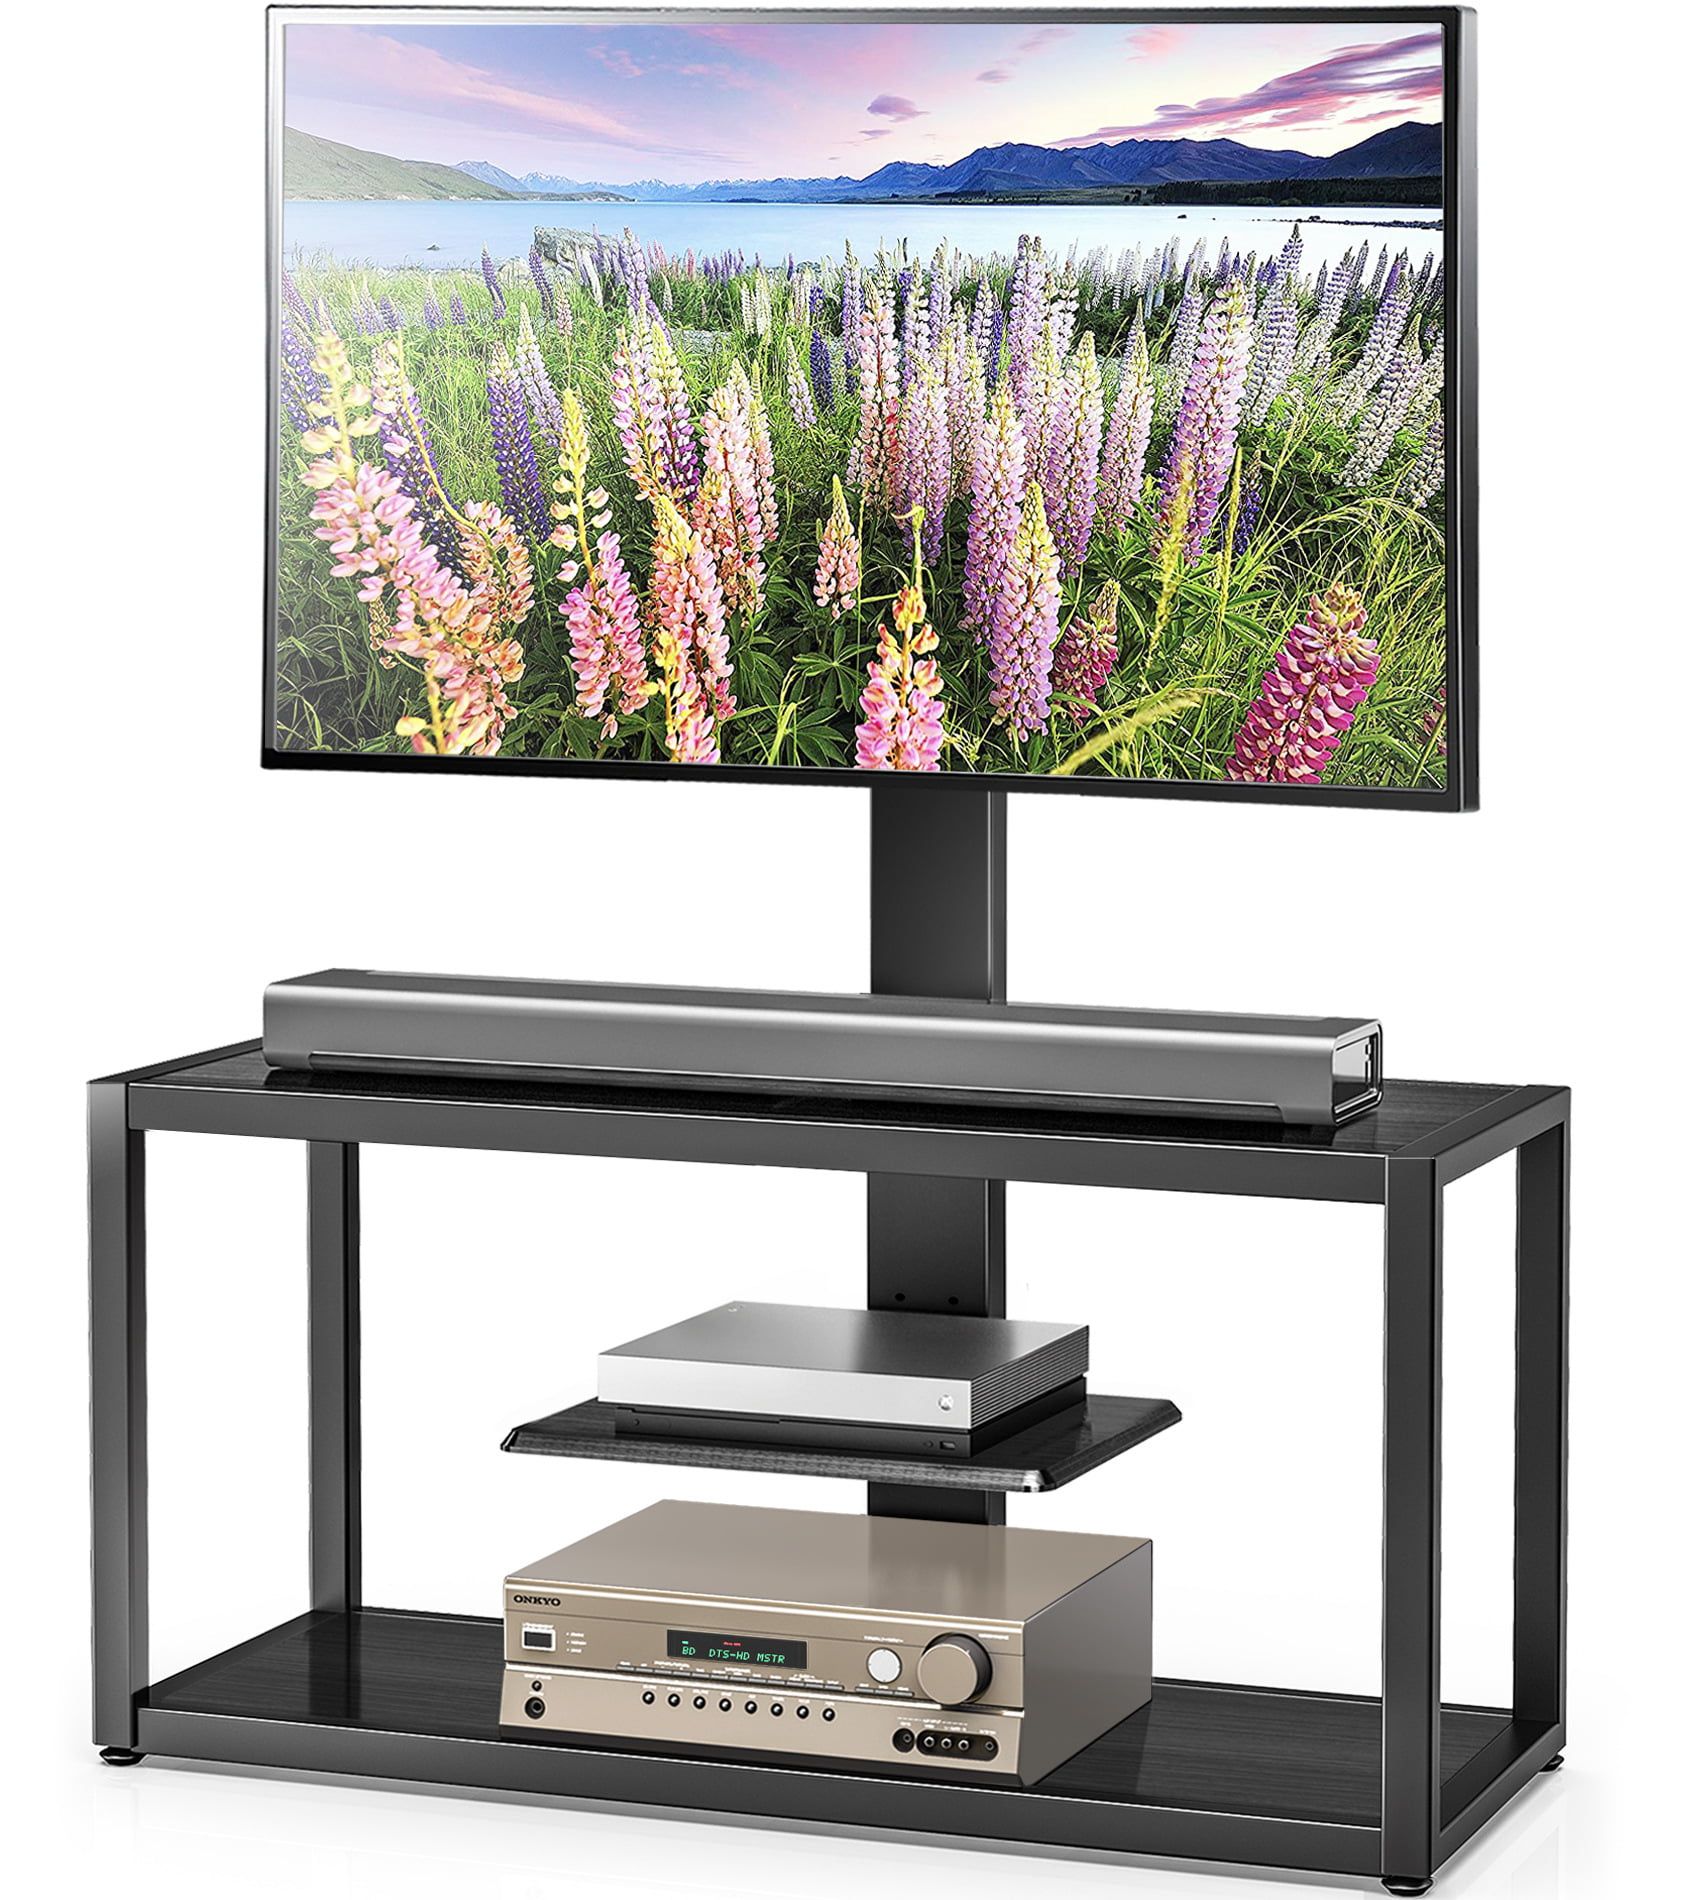 Fitueyes 3 Tiers Floor Tv Stand With Swivel & Tilt Mount – Suitable For With Stand For Flat Screen (View 8 of 20)